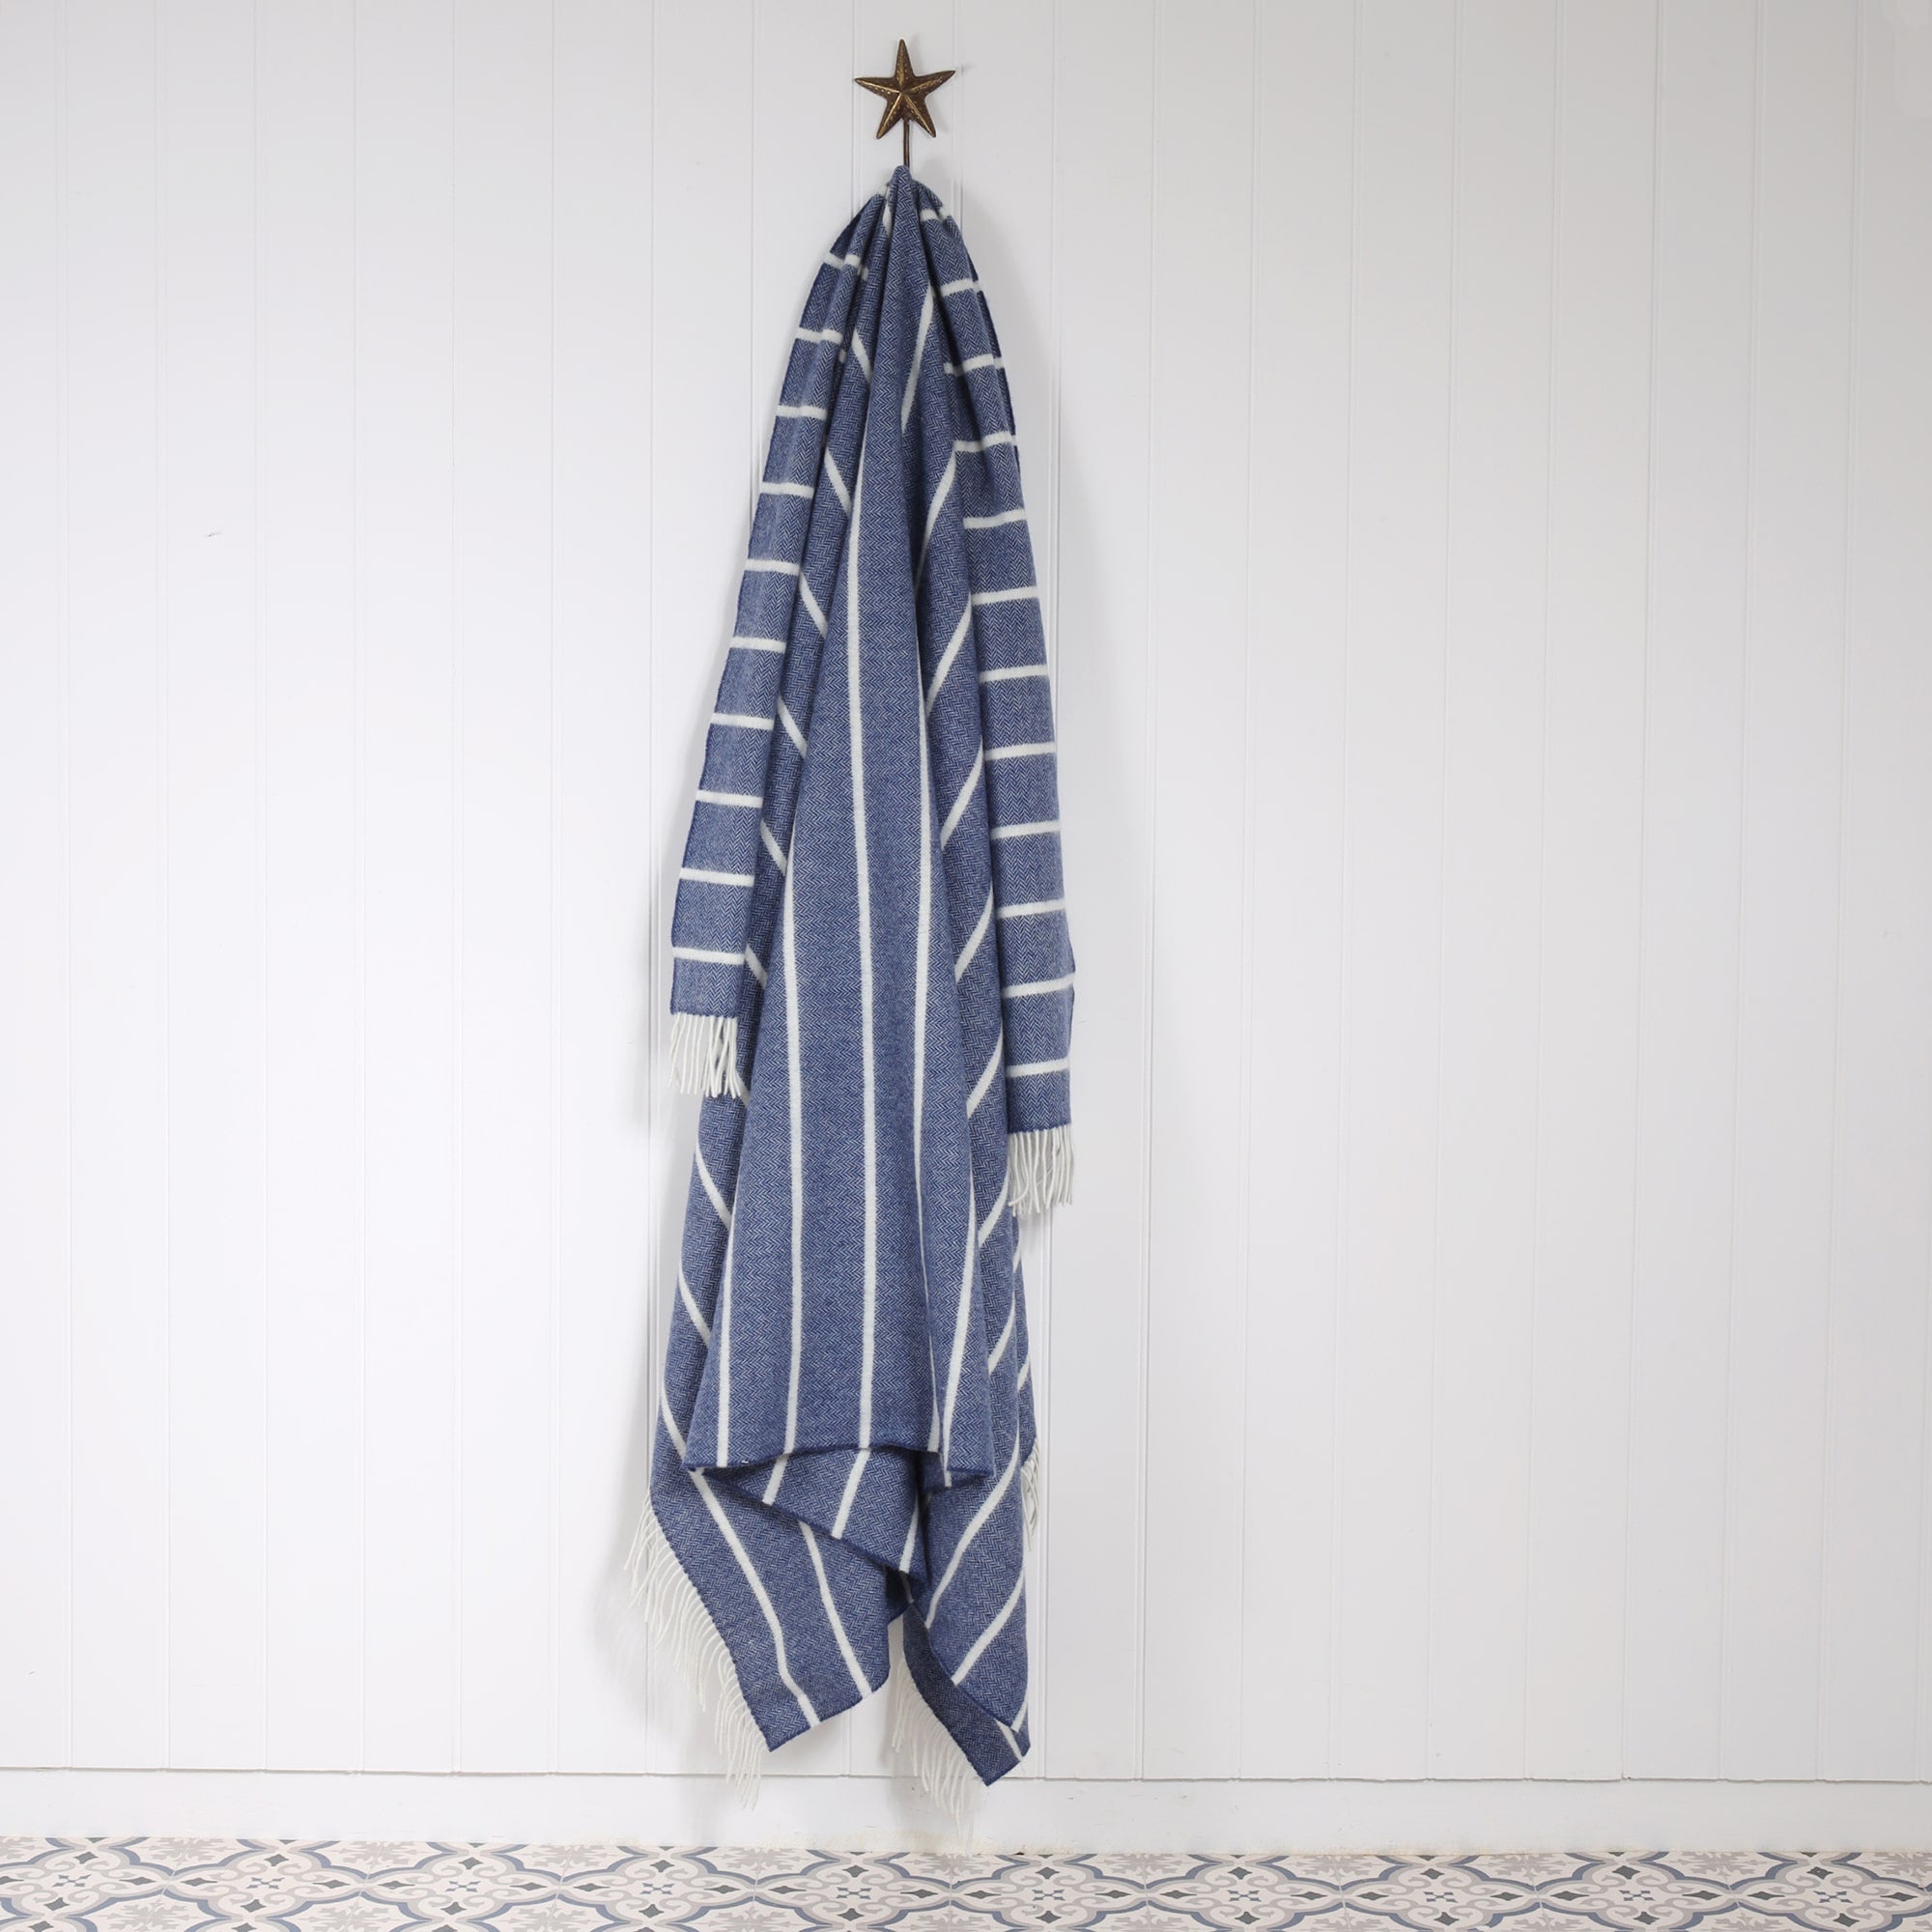 Lambswool Denim and White striped throw draped on a Starfish hook against a white tongue and Grooved wall